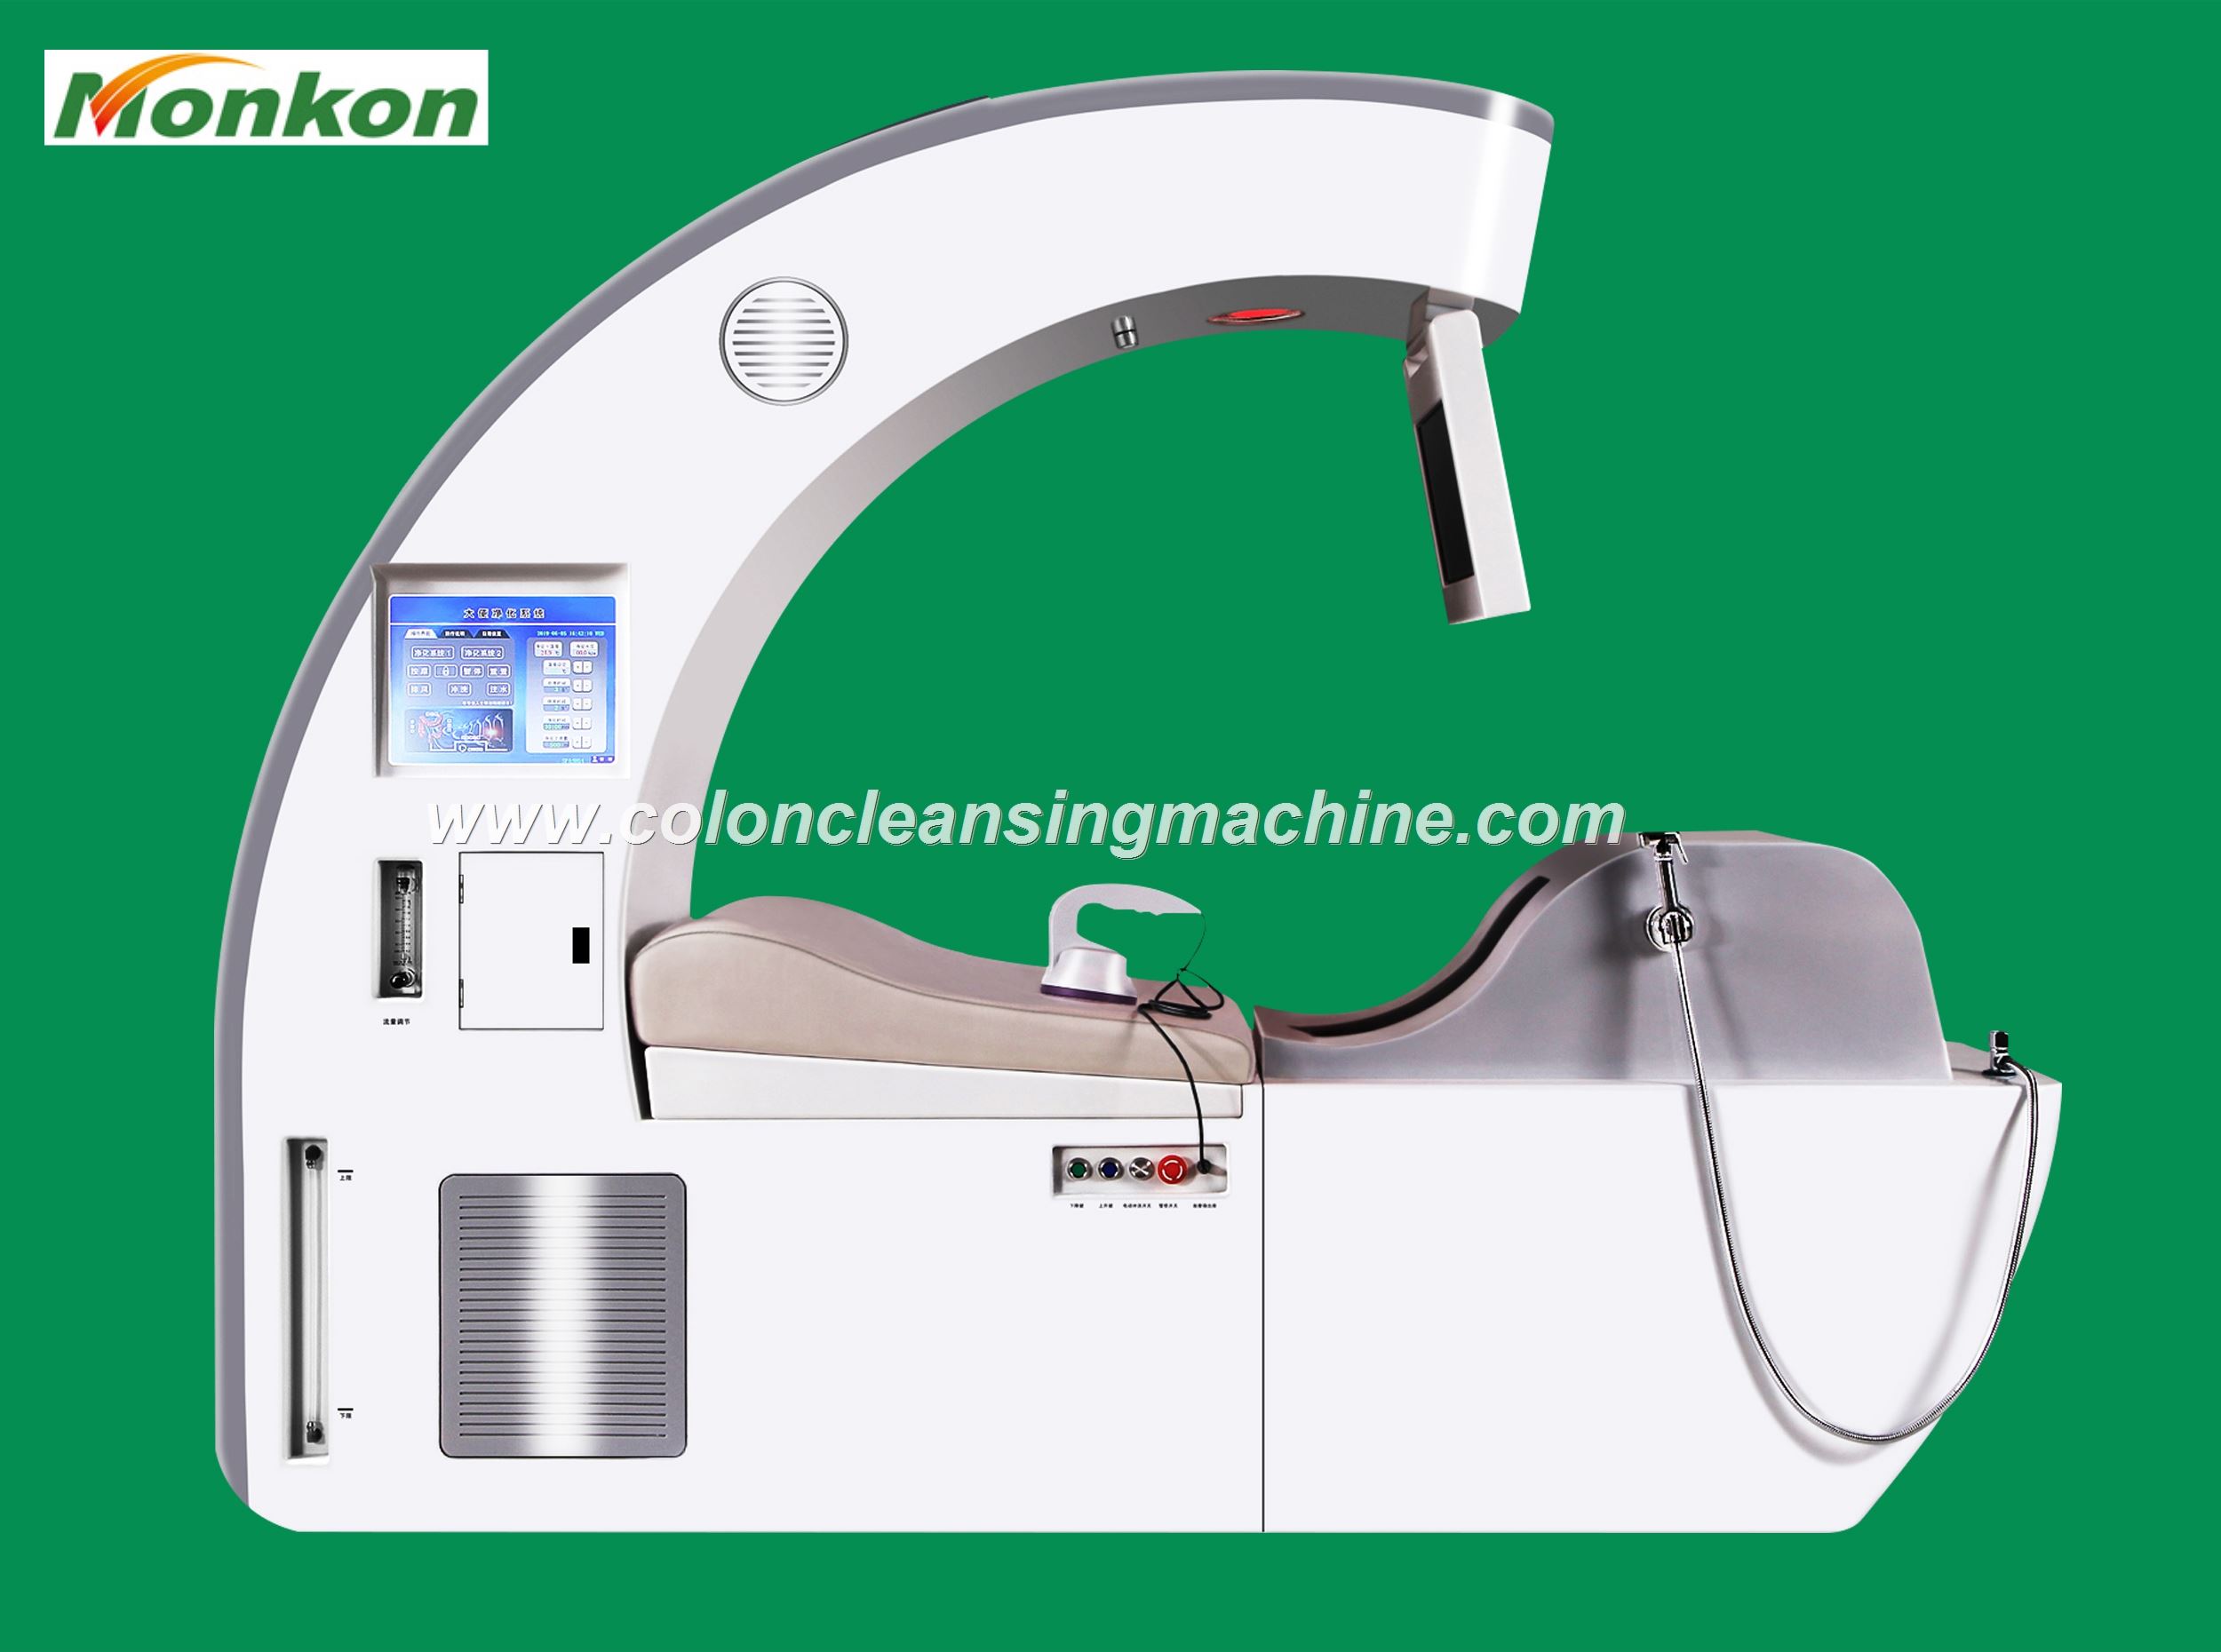 Colon Cleansing Machines